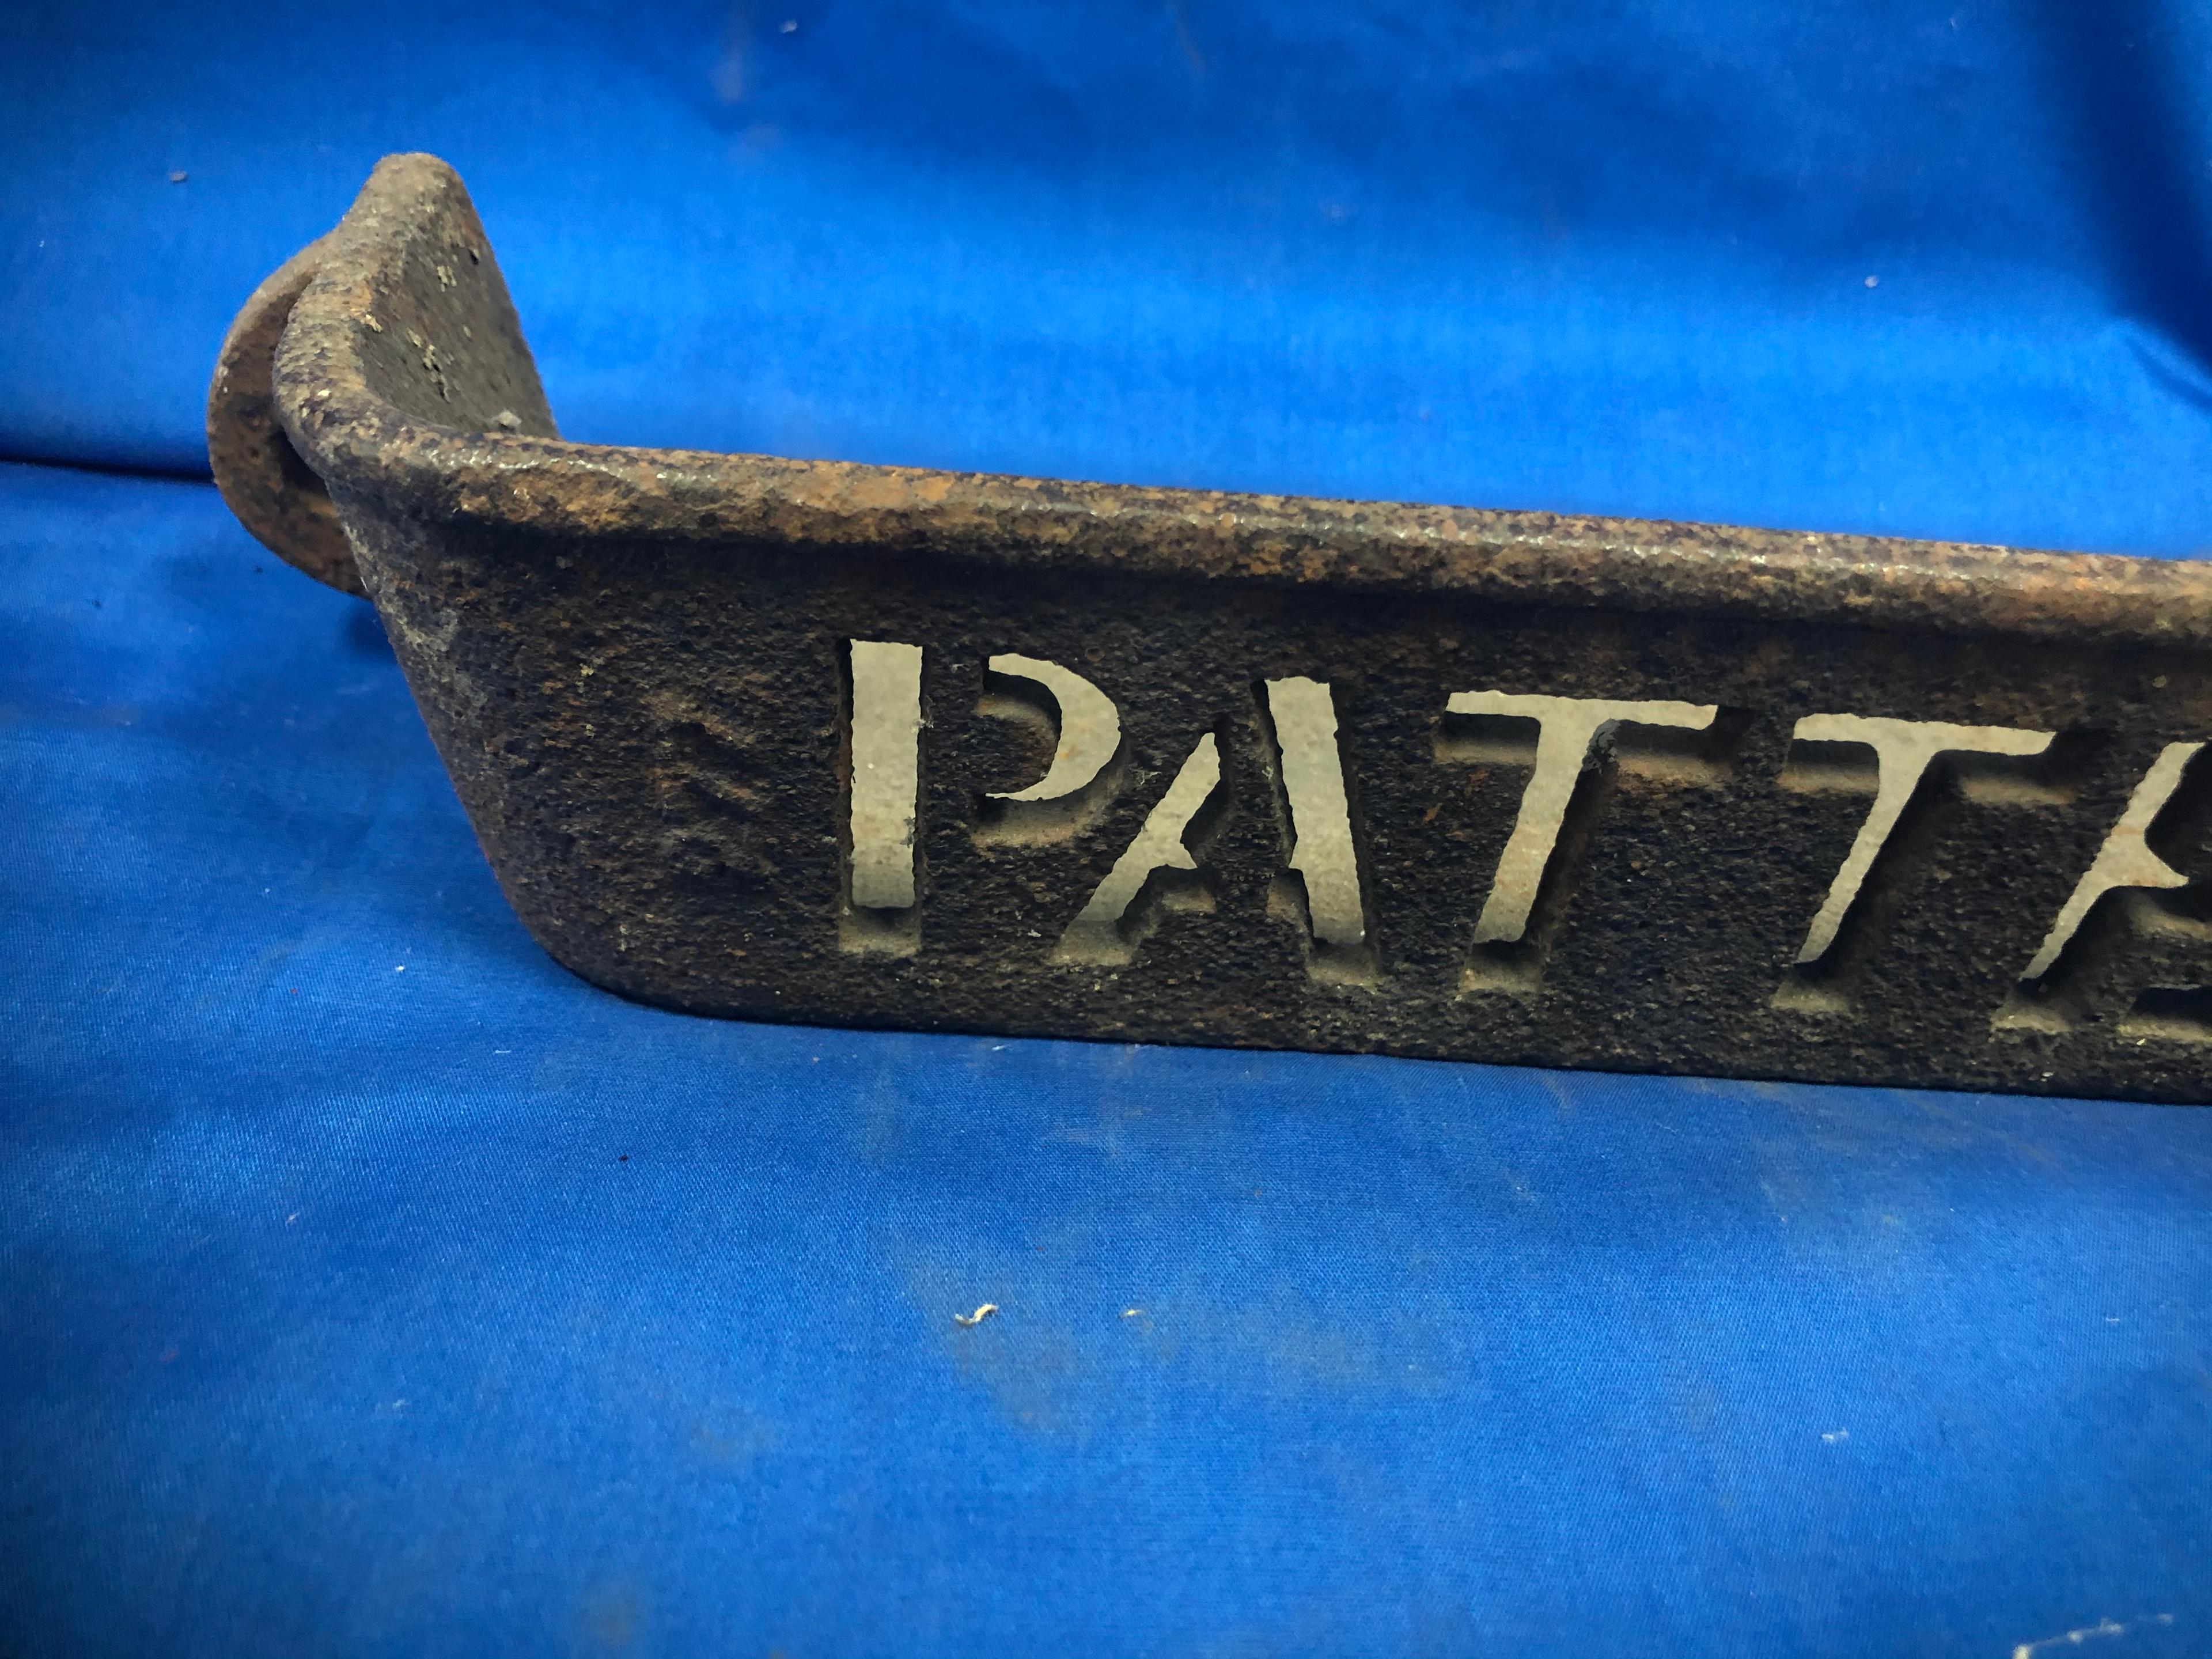 PATTEE IRON HORSE DRAWN IMPLEMENT TOOL BOX